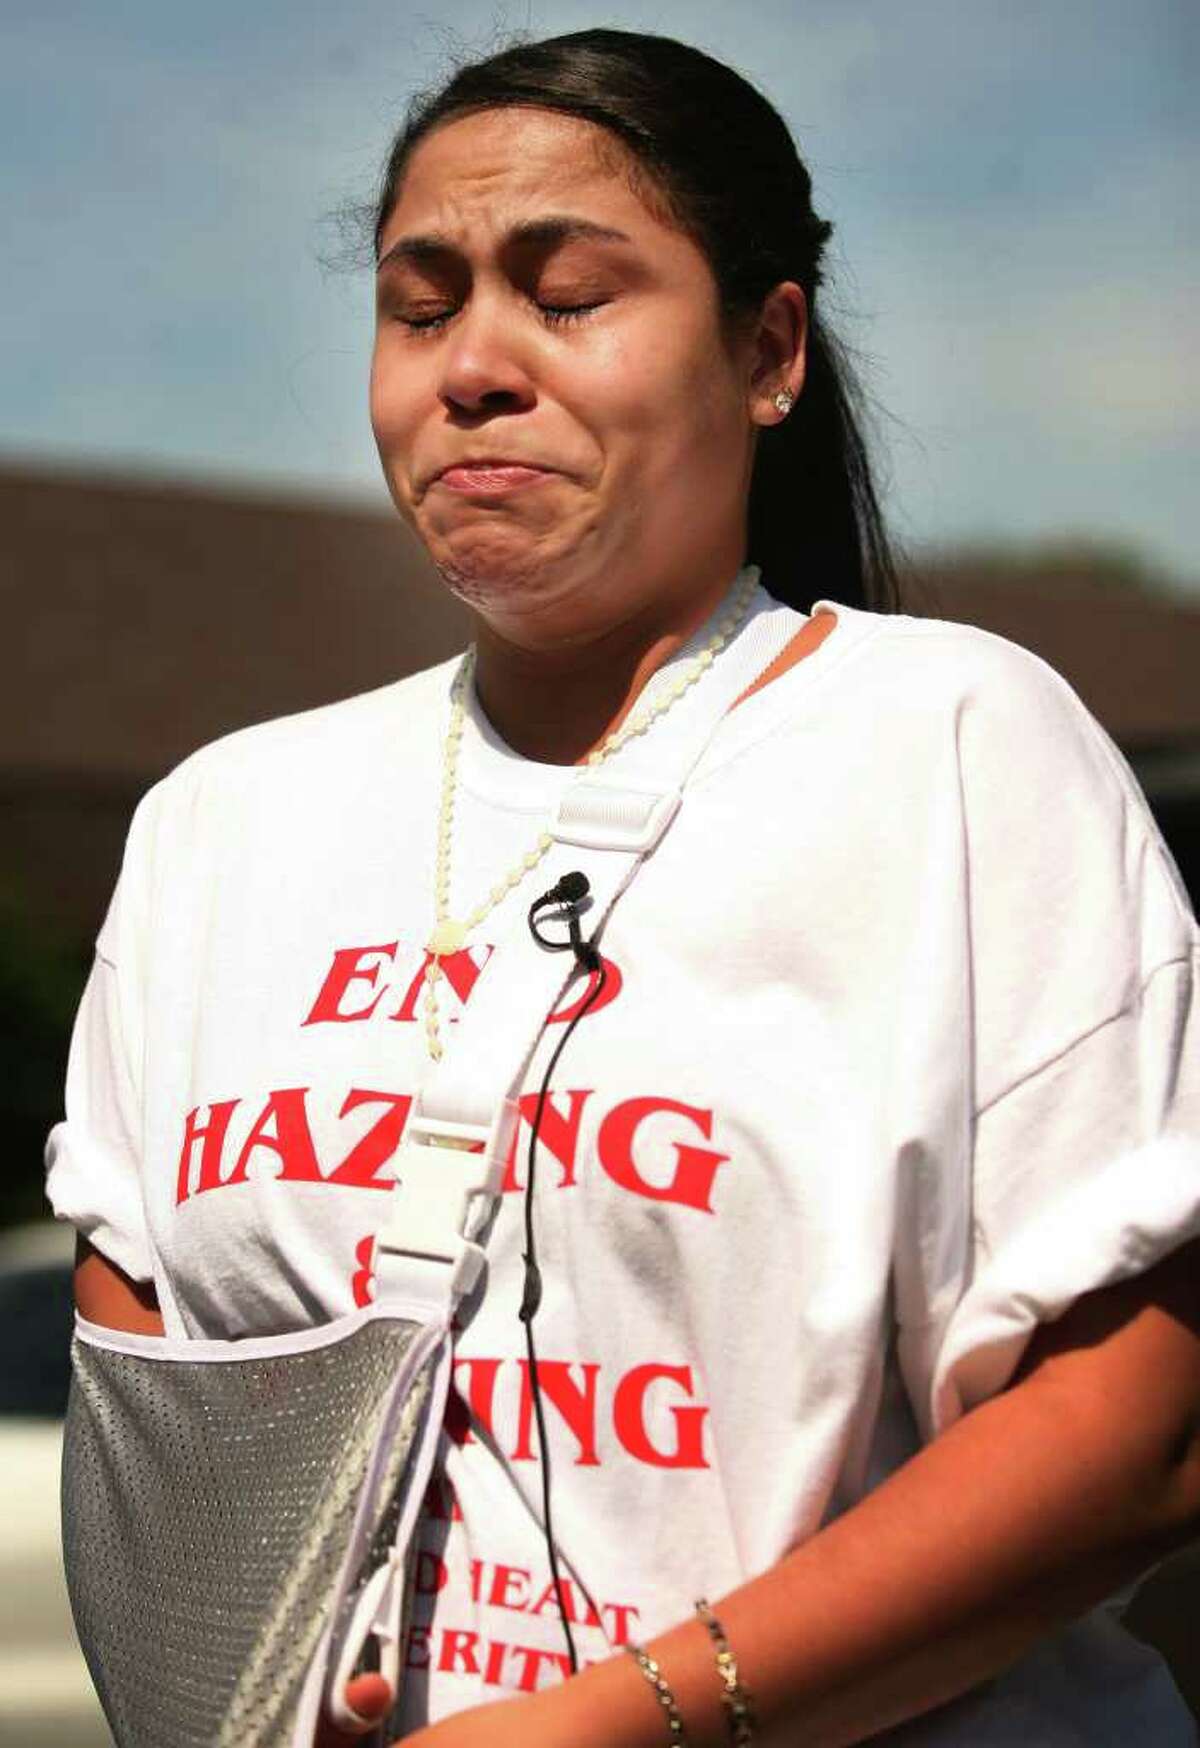 2010 Sacred Heart University graduate Jasmine Vega of Bronx, NY cries as she discusses her injuries at a rally outside Sacred Heart University in Fairfield on Tuesday, September 7, 2010. Vega claims that a torn ligament in her shoulder as well as a severe sprain and pinched nerve in her leg are the result of a sorority hazing incident on October 2, 2009.